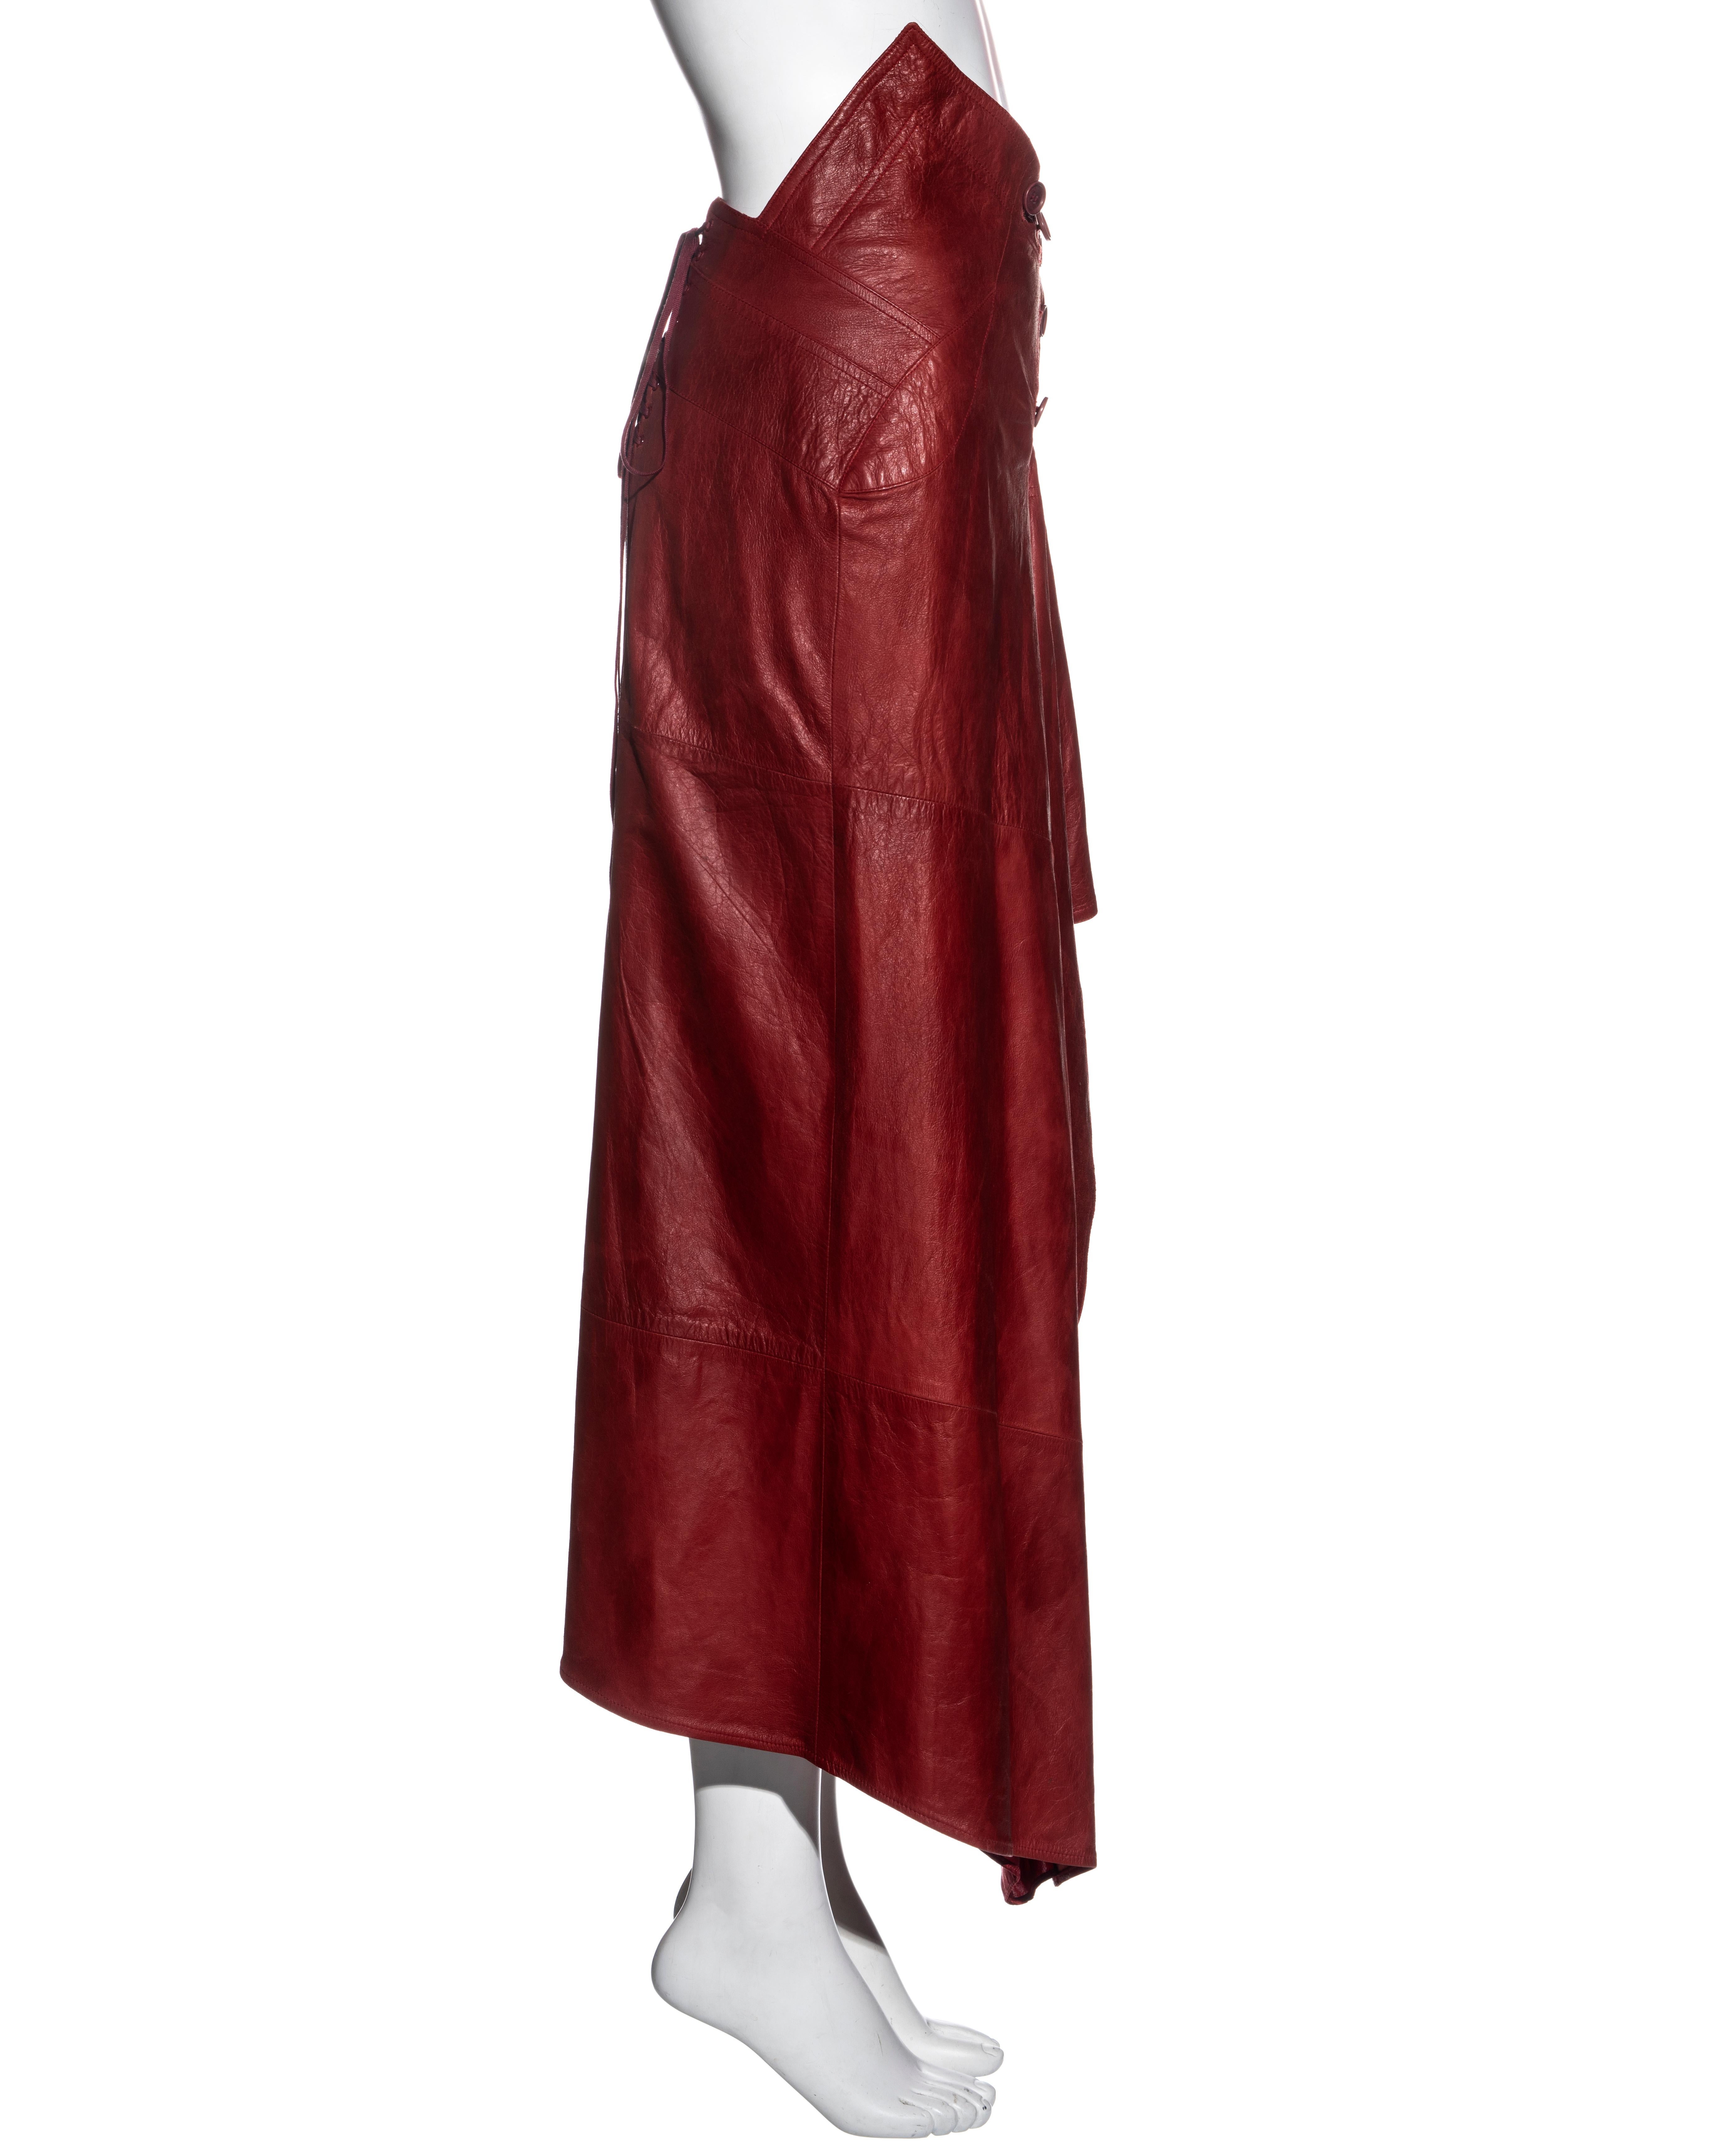 Christian Dior by John Galliano red leather asymmetric cut skirt, ss 2000 4